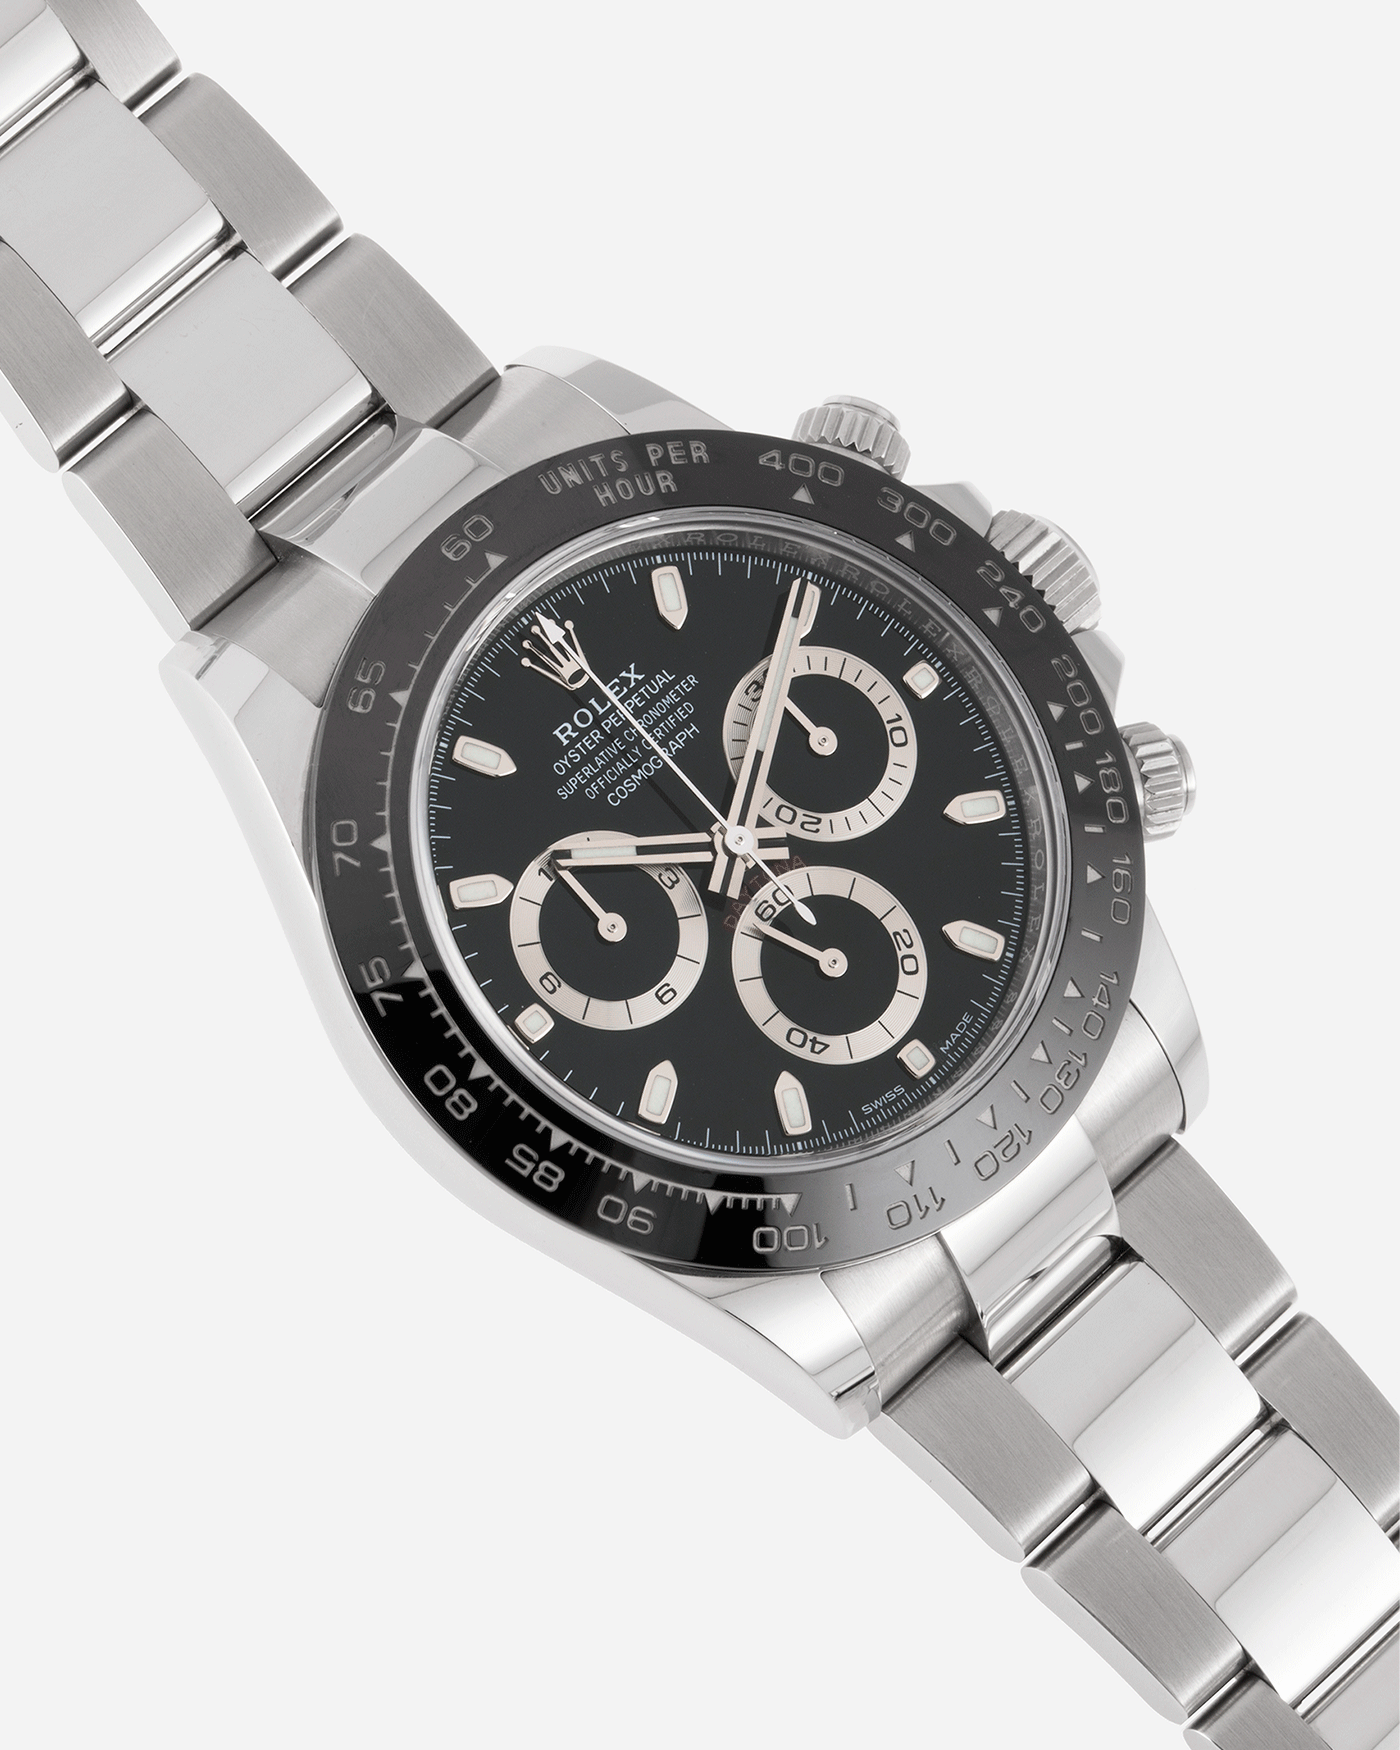 Brand: Rolex Year: 2019 Model: Daytona Reference: 116500 Material: Stainless Steel Movement: Calibre 4130 Case Diameter: 40mm Strap: Stainless Steel Rolex Oyster Bracelet